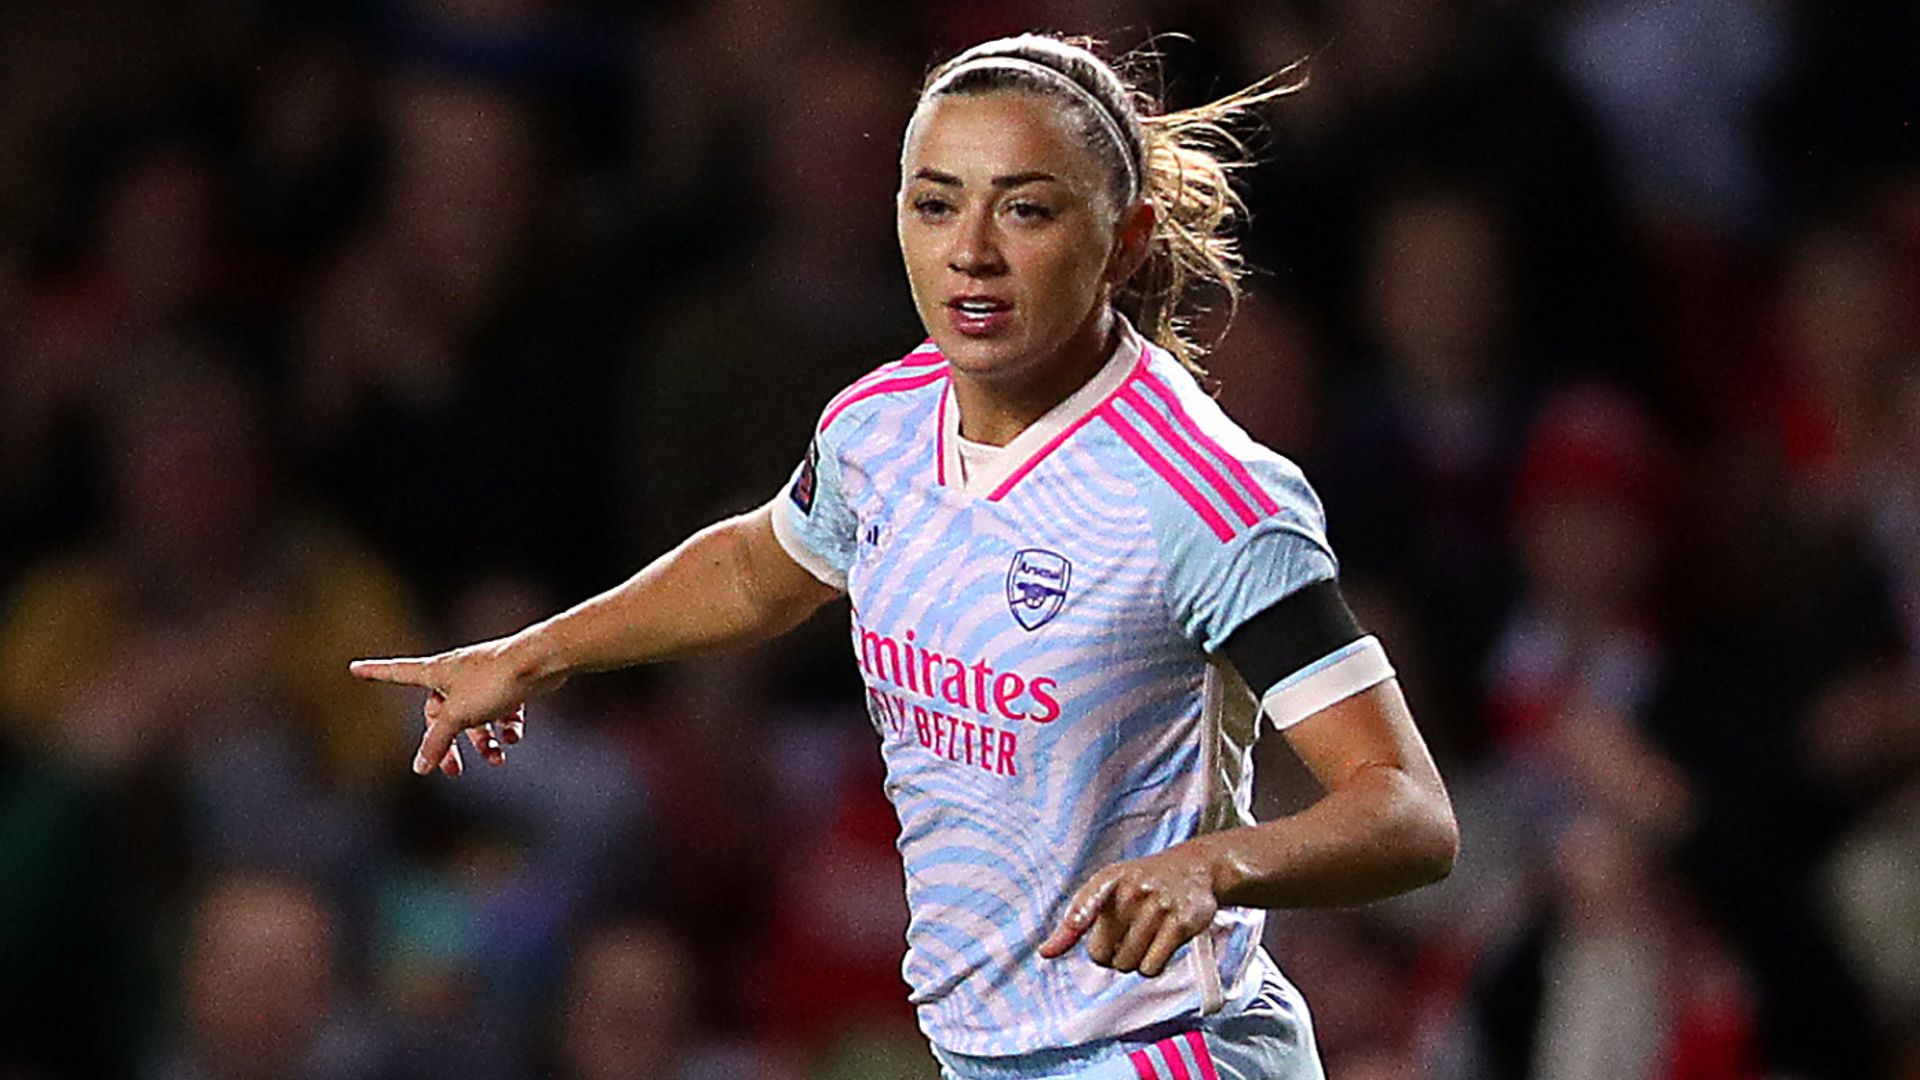 McCabe double as Arsenal win at Bristol City on Miedema return